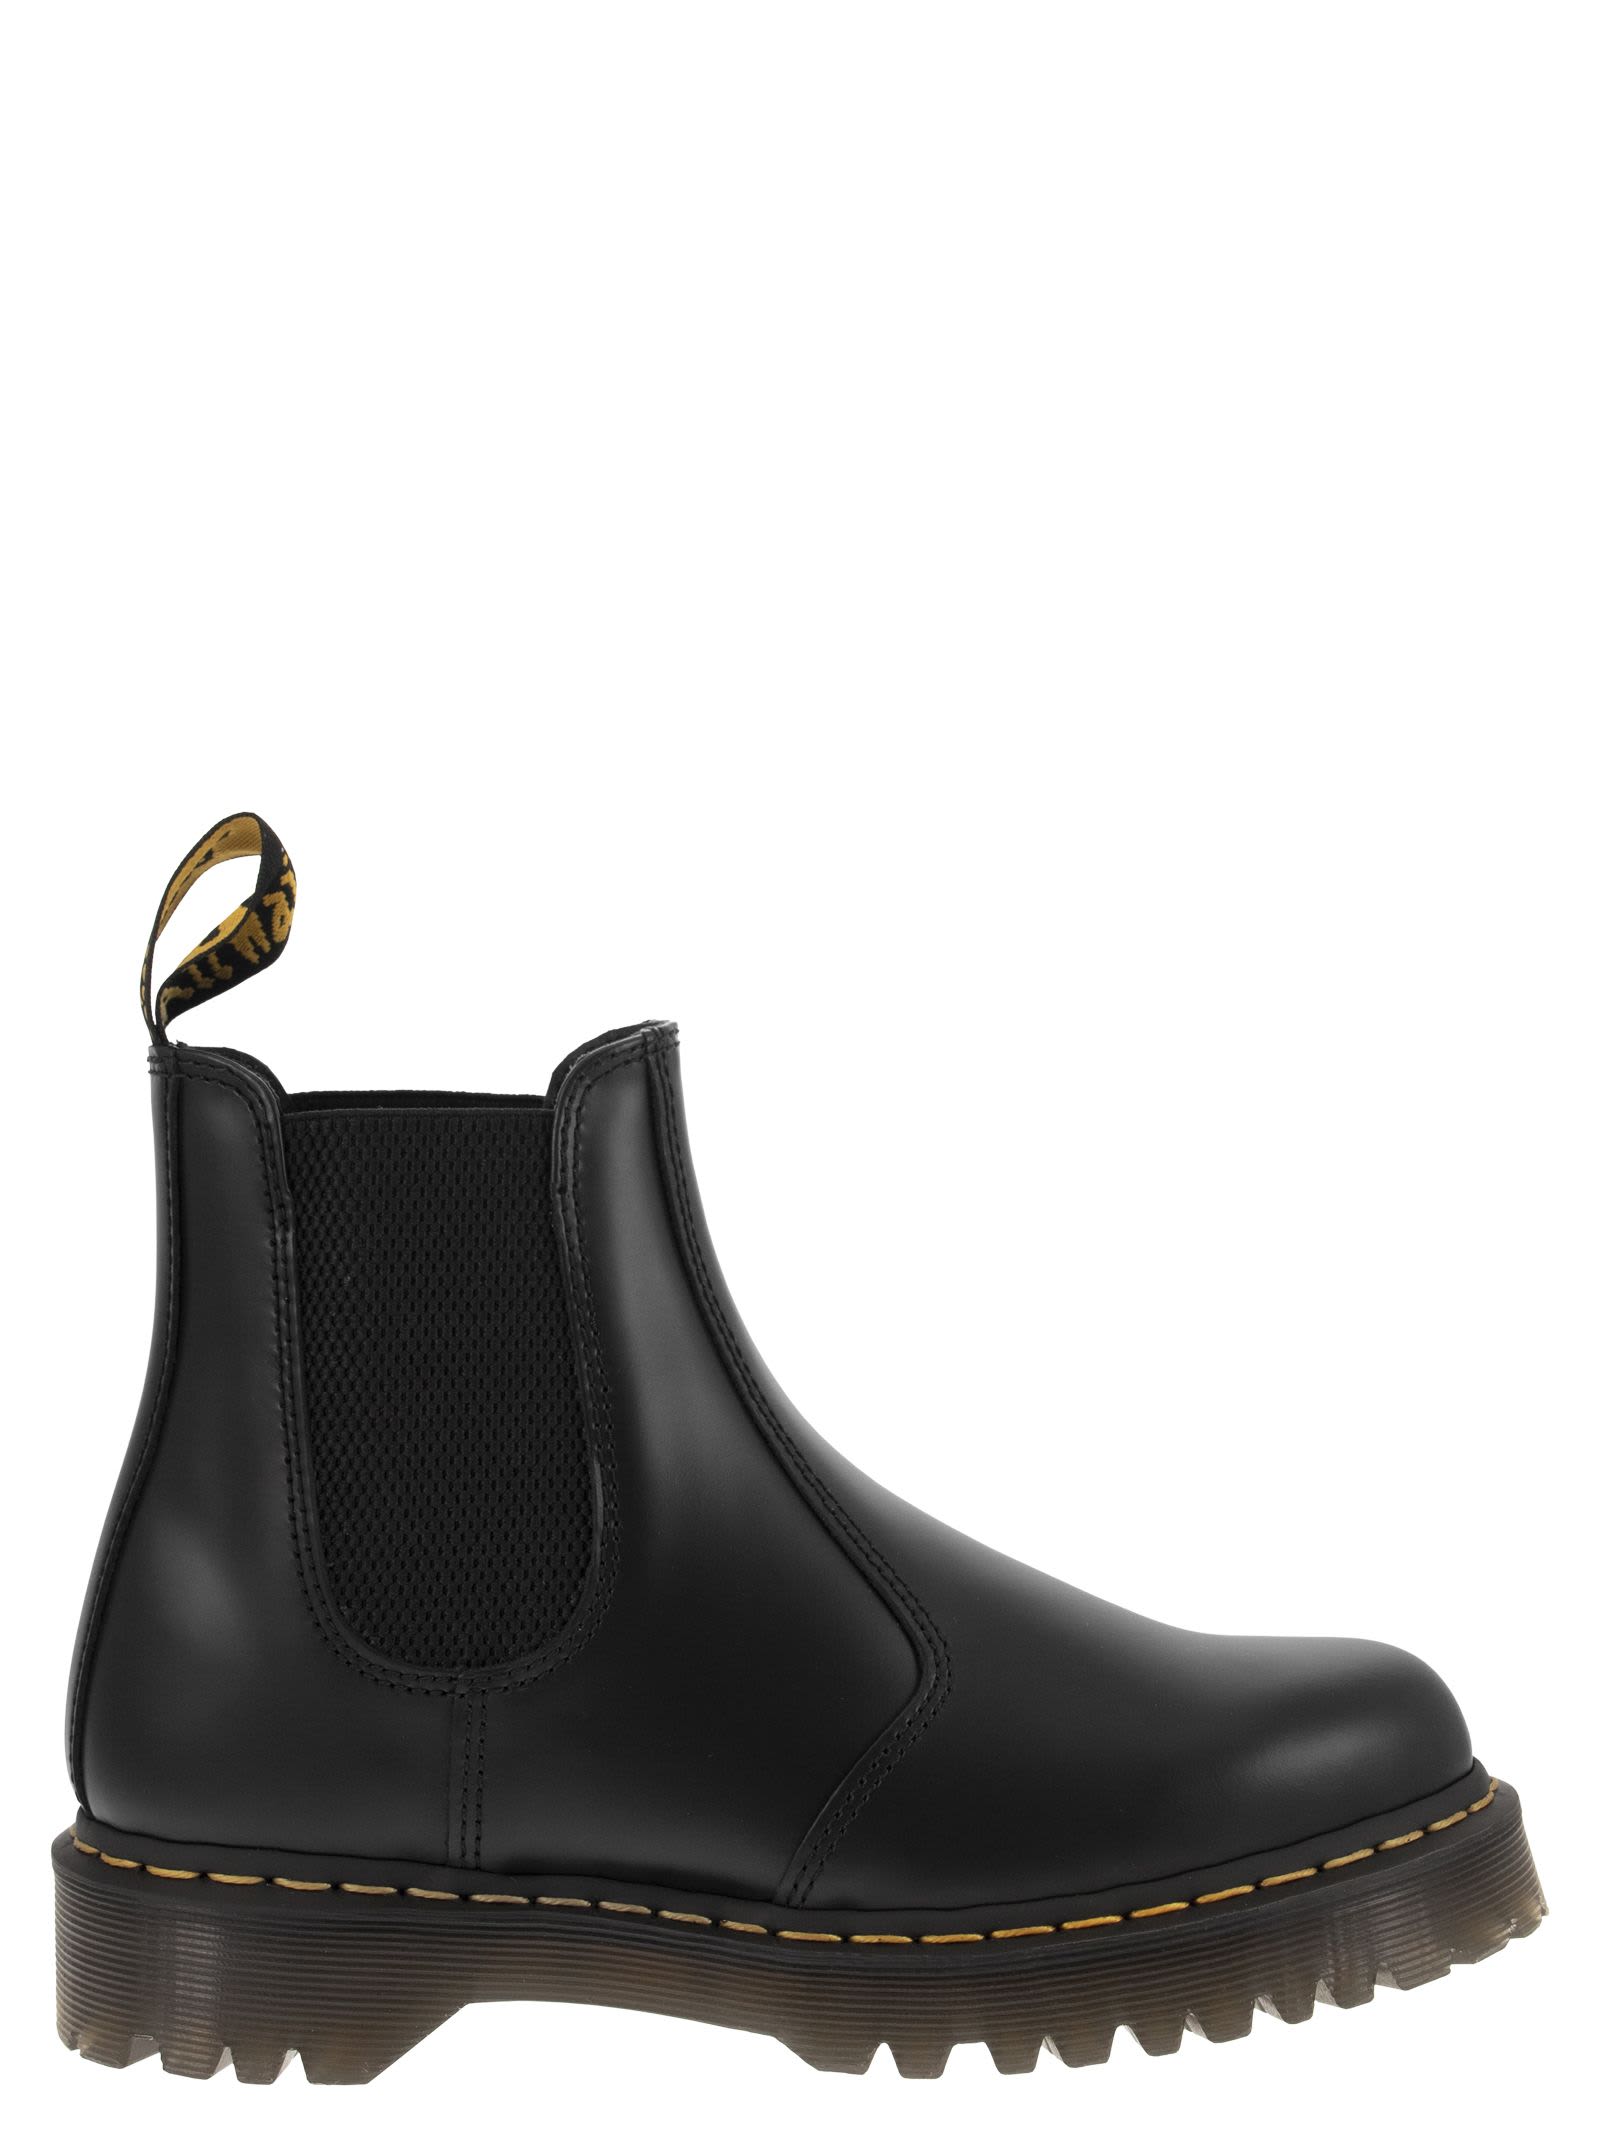 Dr. Martens Smooth Leather 2976 Bex Chelsea Boots